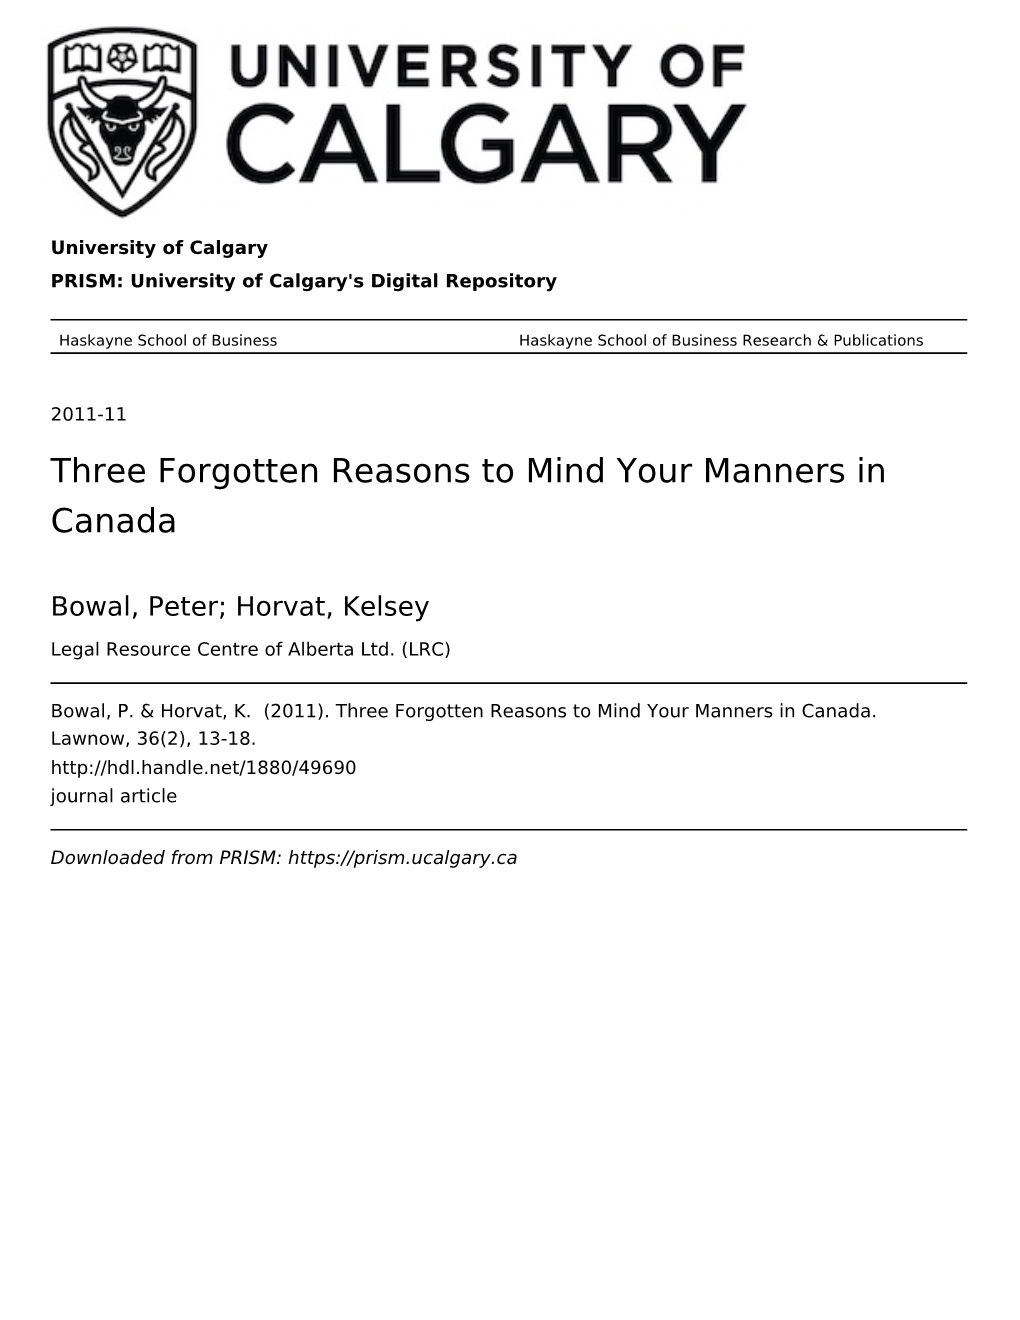 Three Forgotten Reasons to Mind Your Manners in Canada